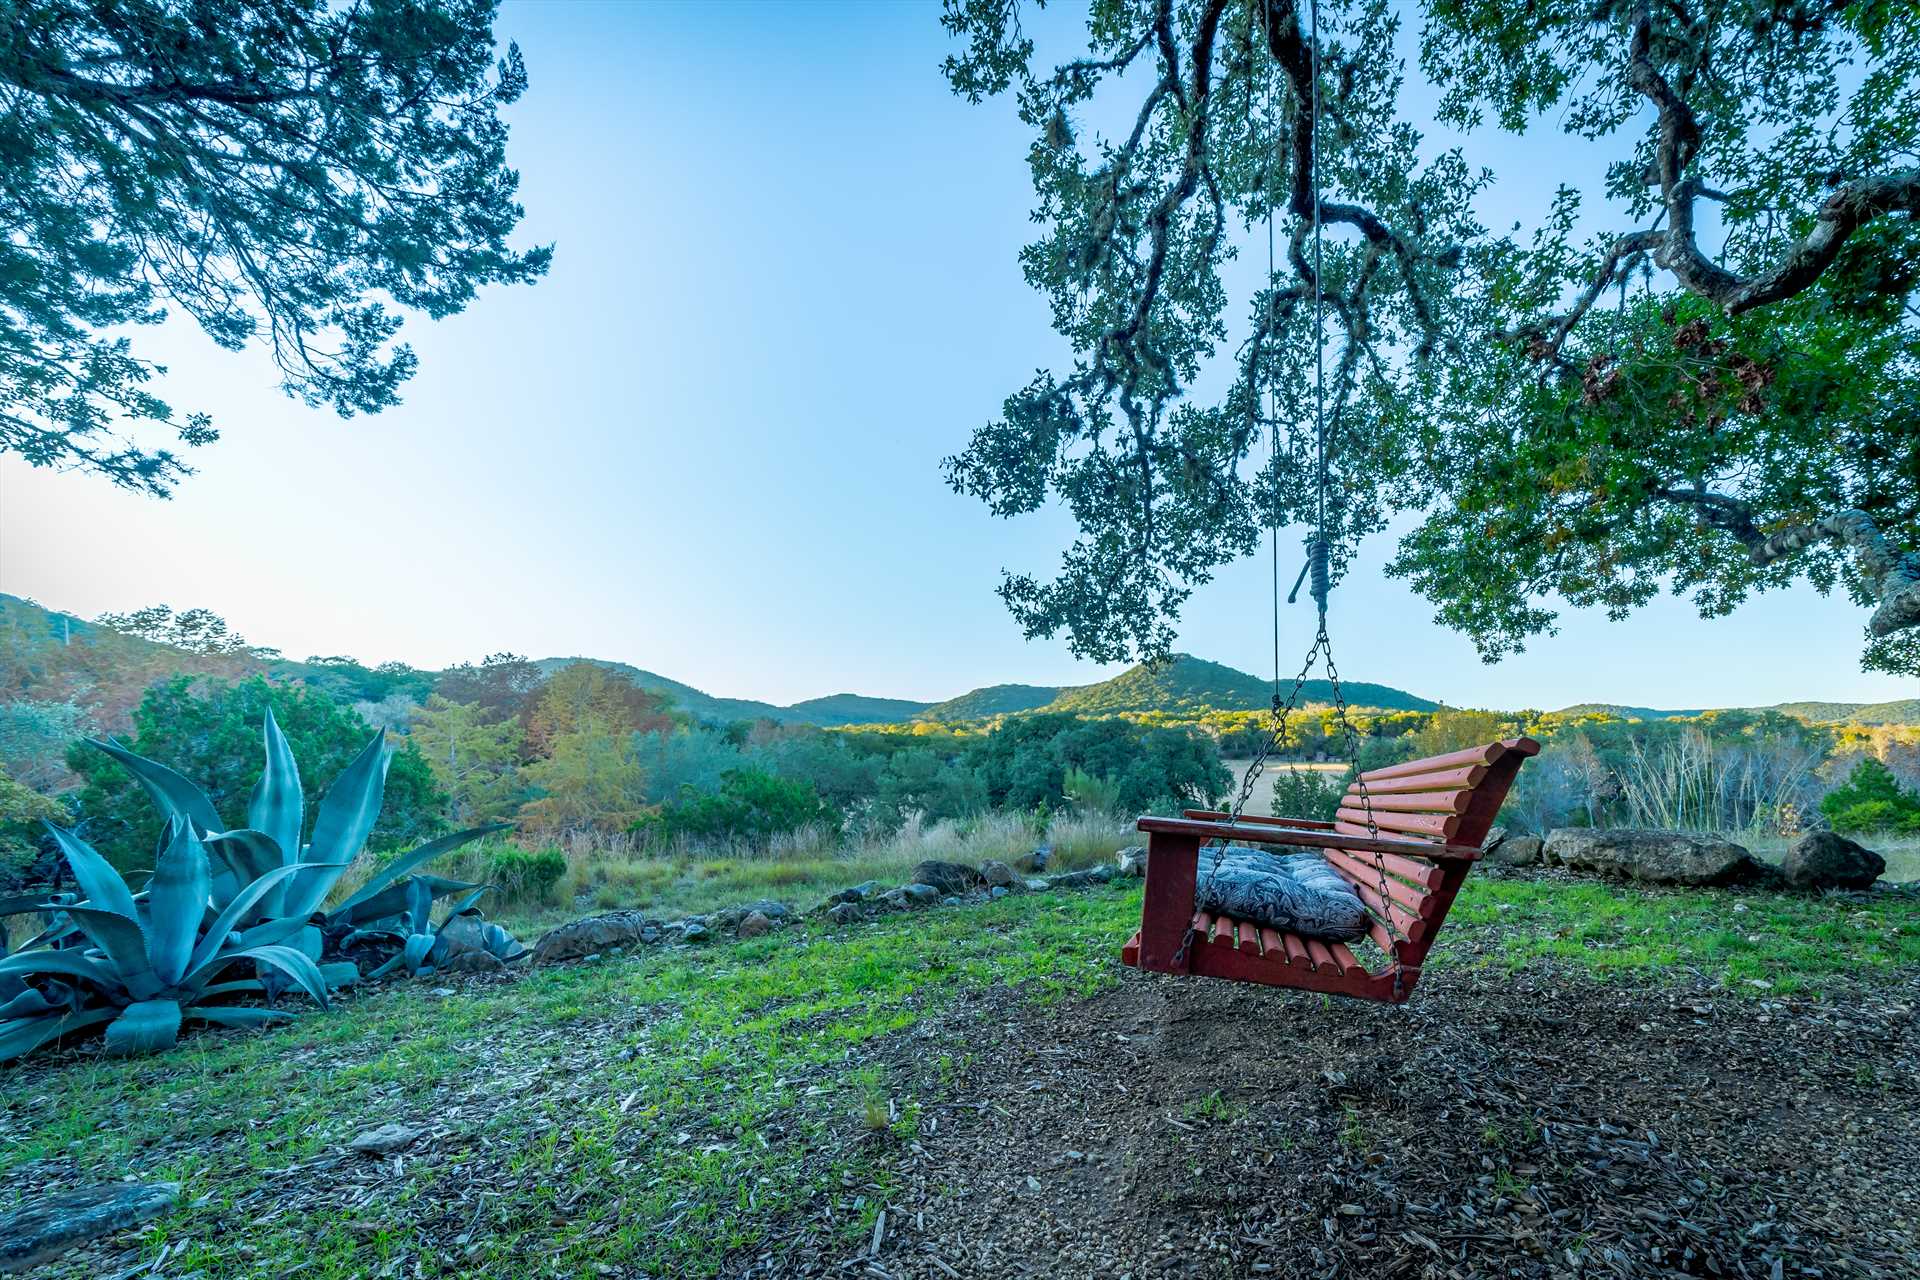                                                 You'll want to take a seat on the swing here! It's a wonderful romantic setting, and the mountain views are breathtaking.